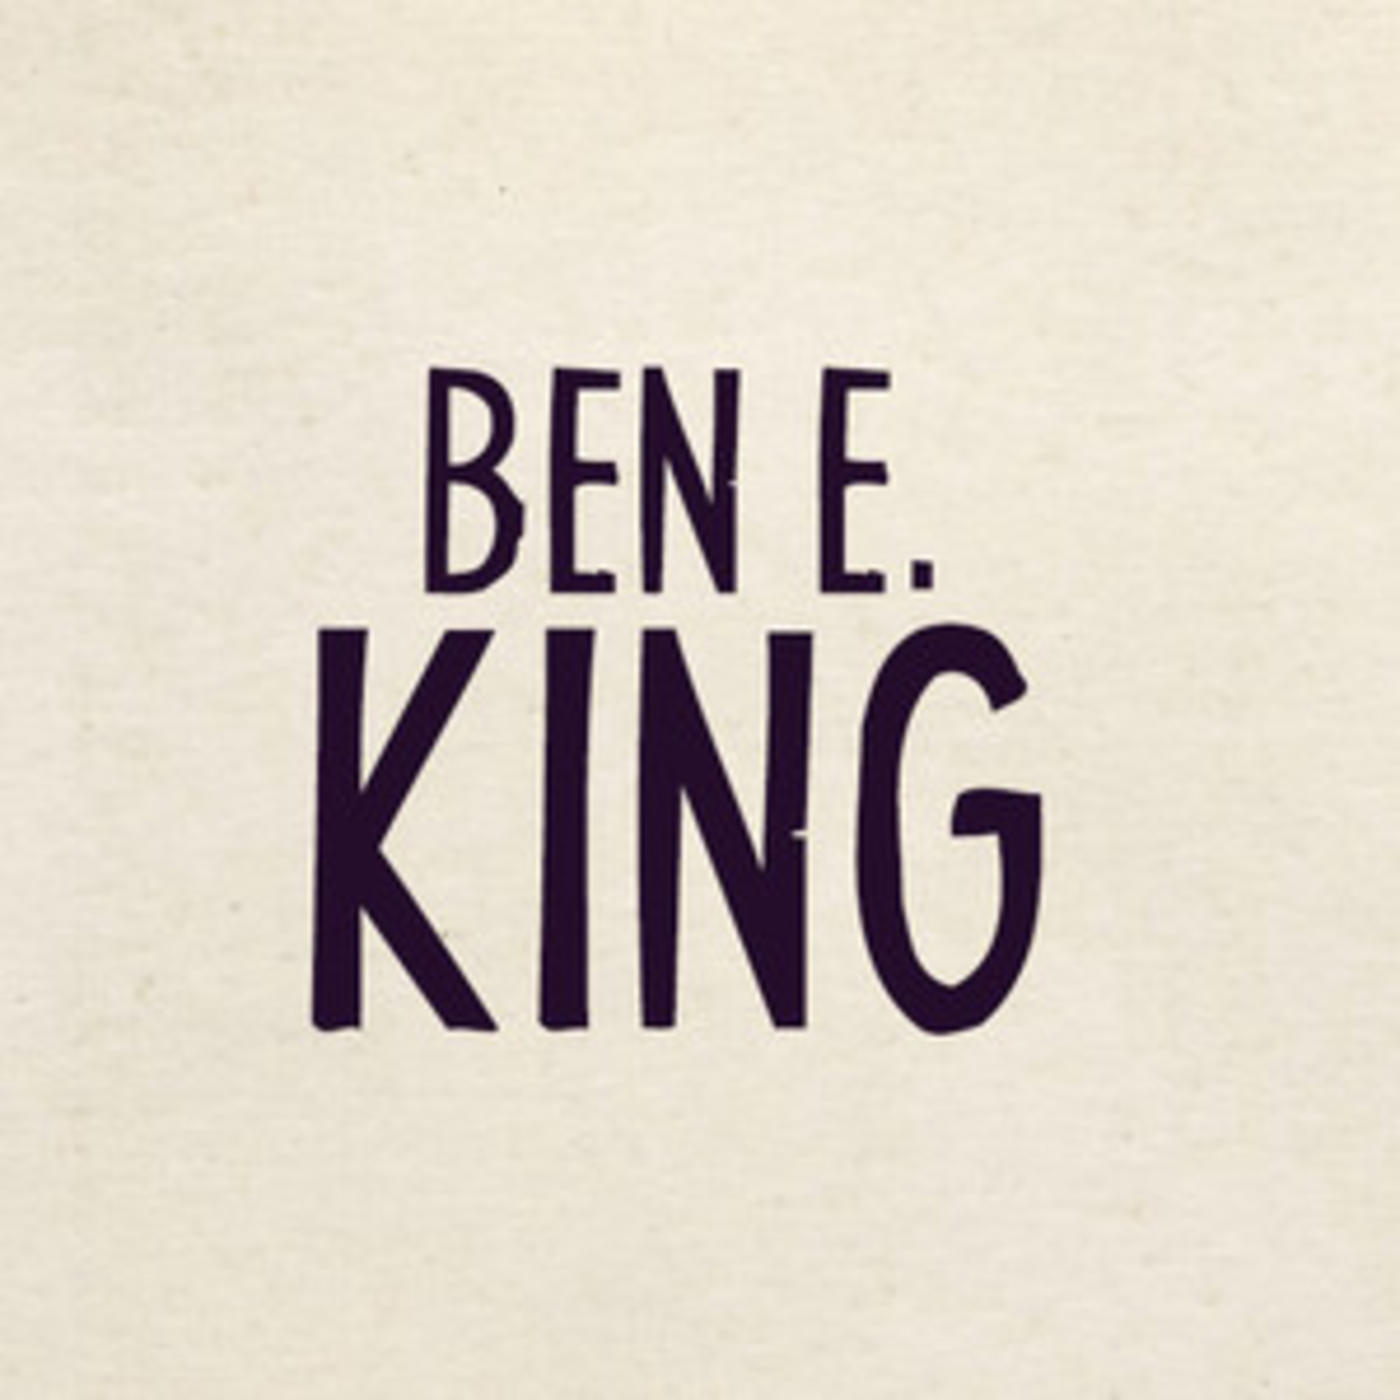 Ben E. King - Official Playlist - Stand By Me, This Magic Moment, Will You Still Love Me Tomorrow